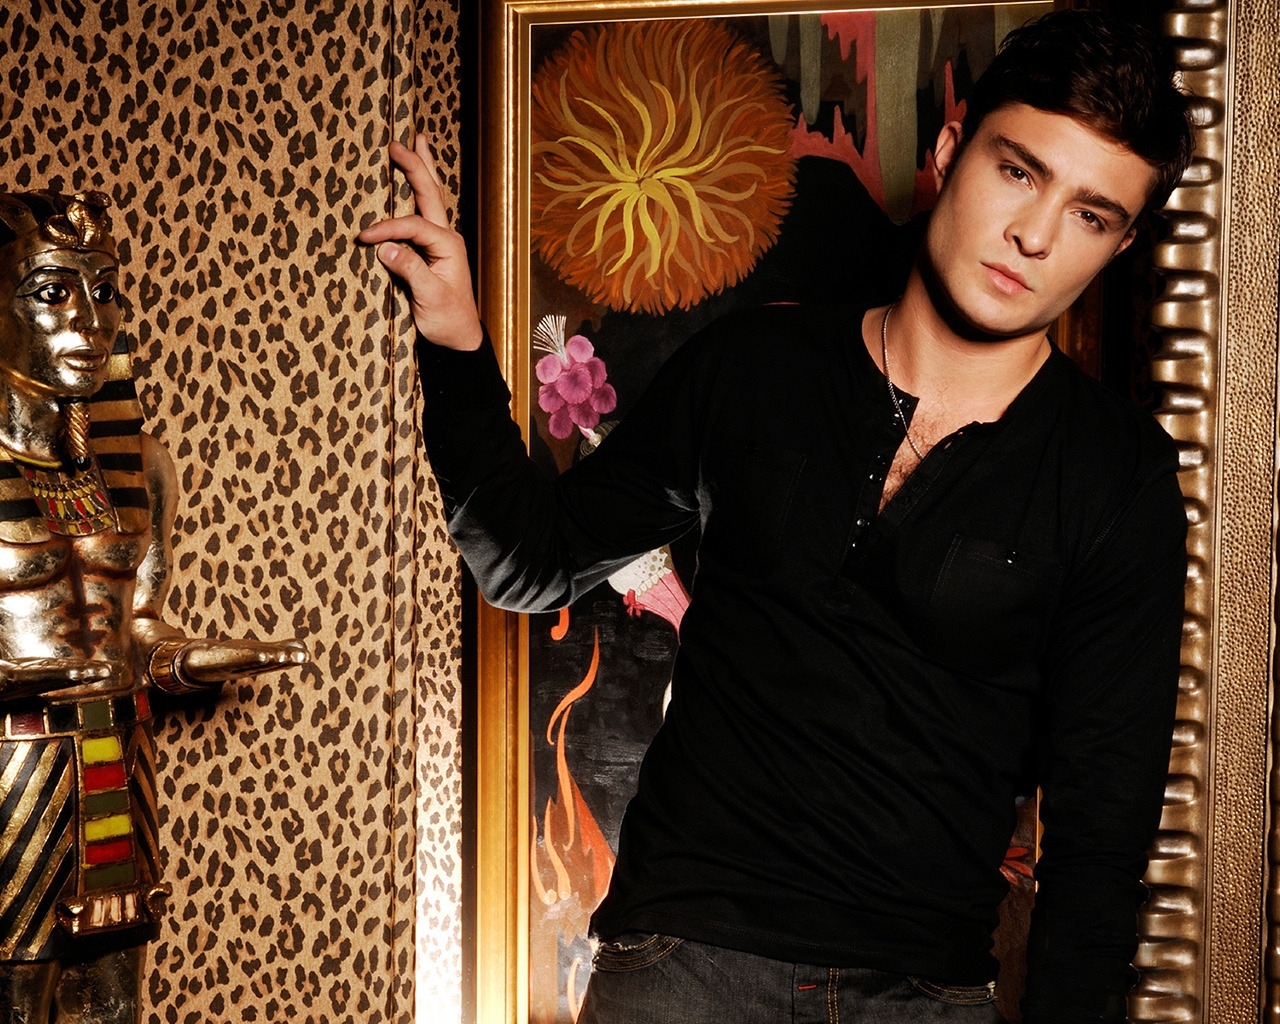 Handsome Ed Westwick for 1280 x 1024 resolution